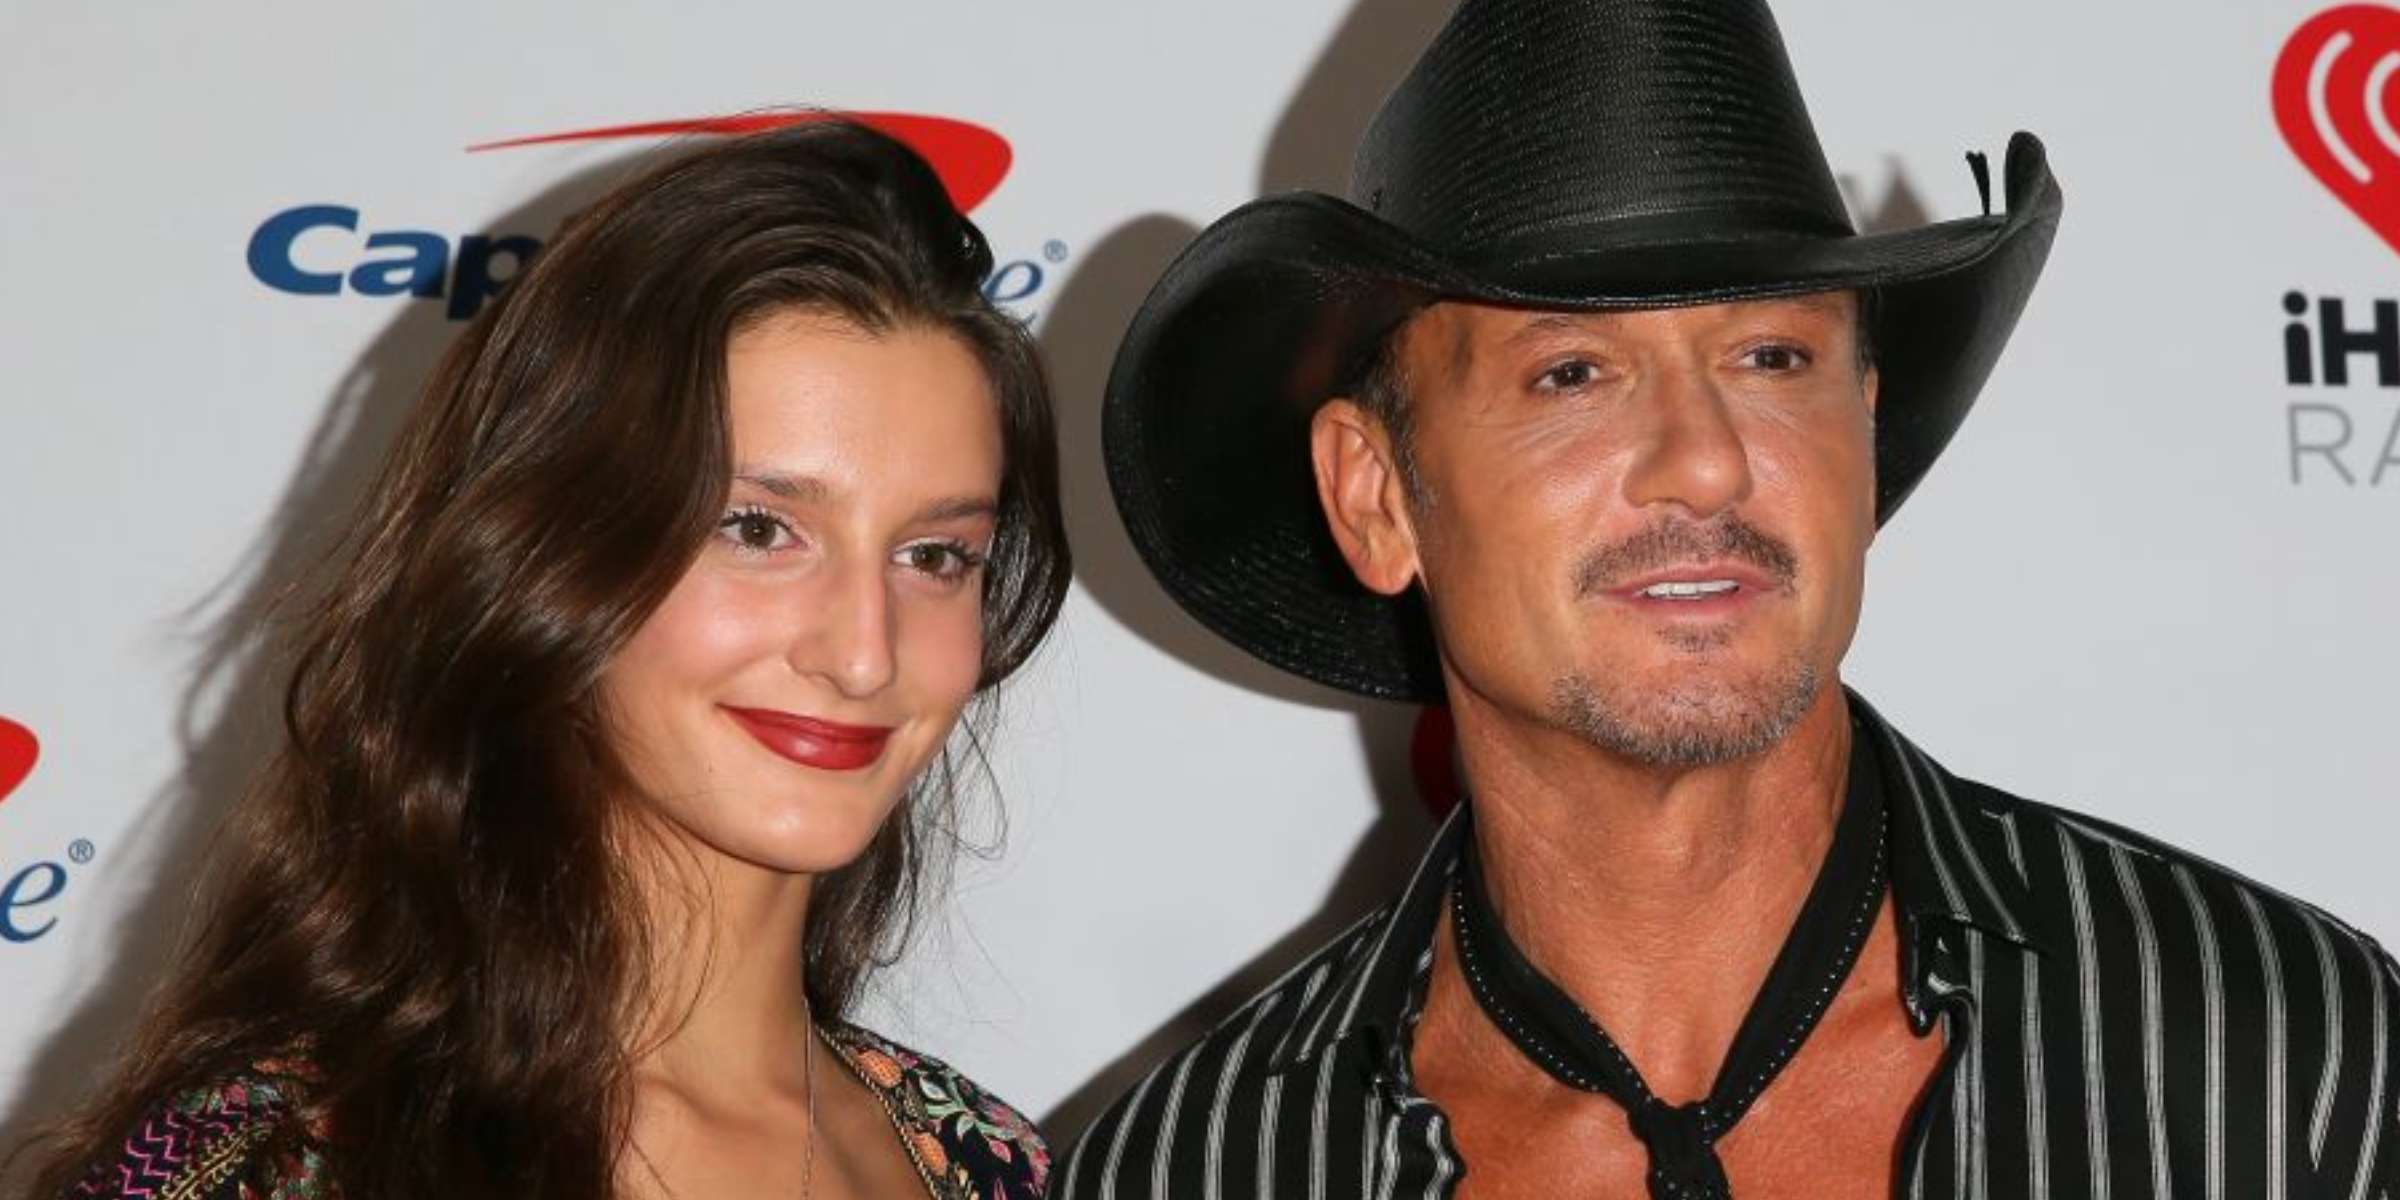 Audrey McGraw and her dad, Tim McGraw | Source: Getty Images